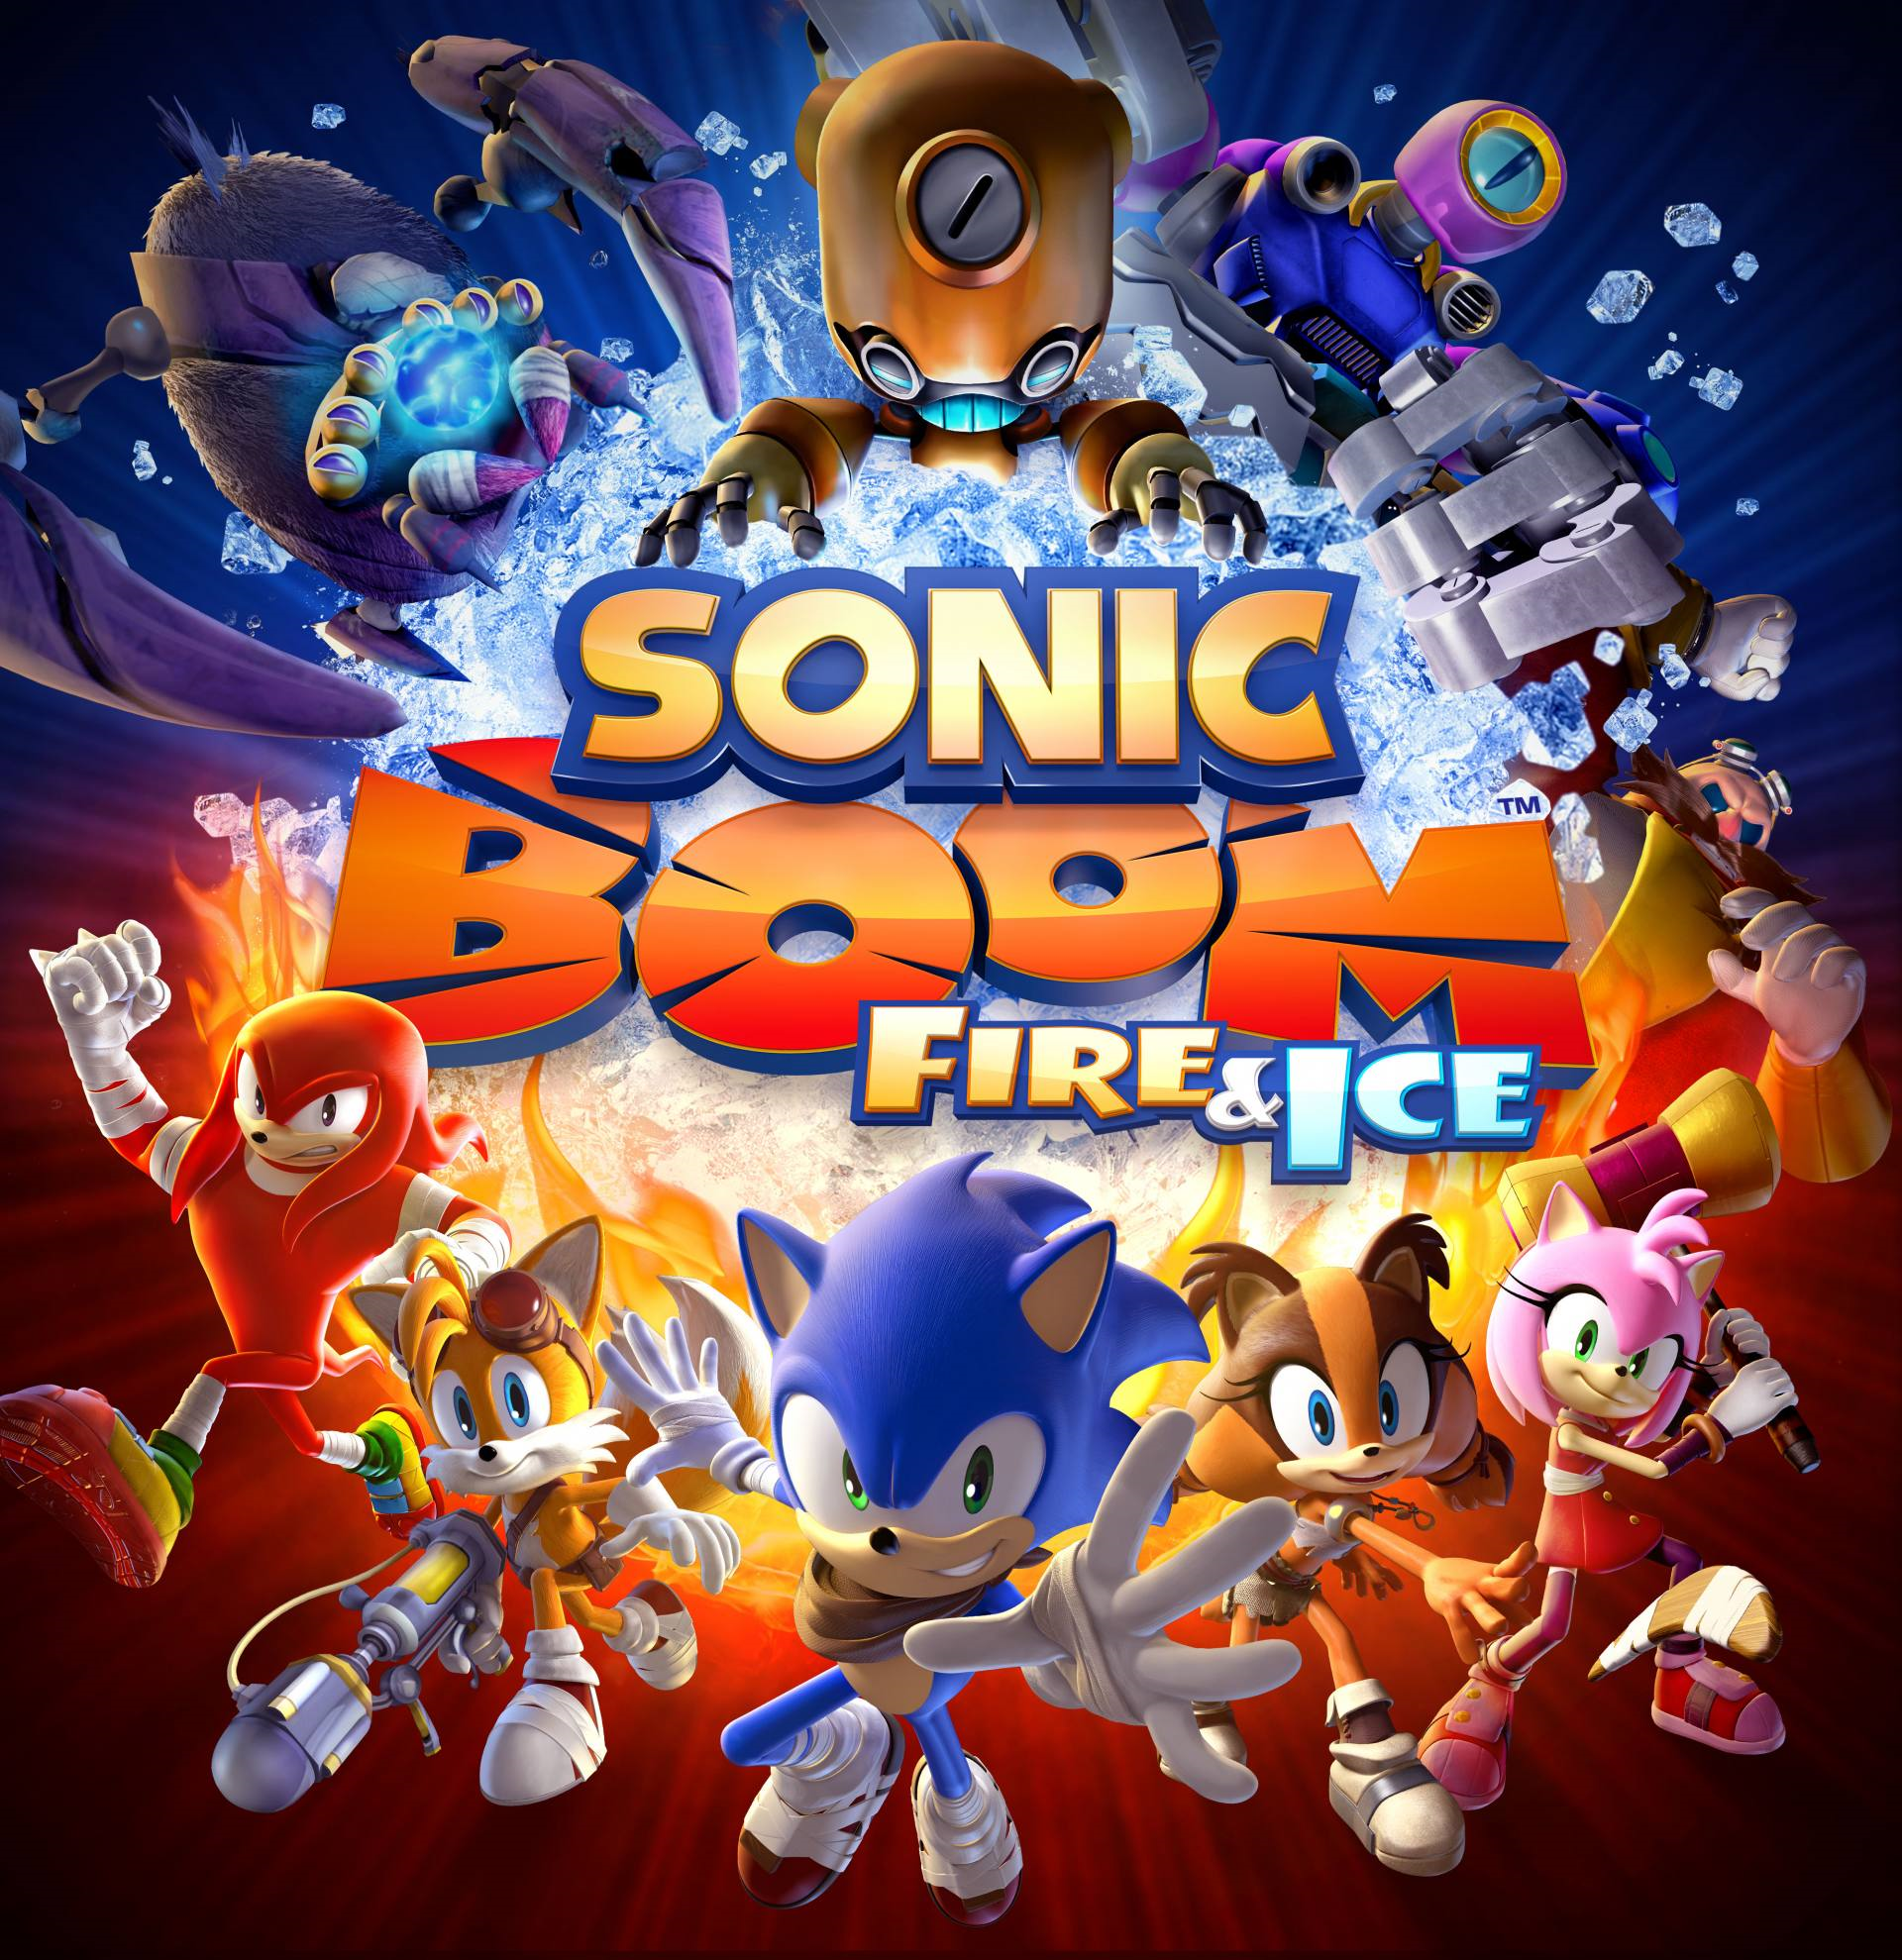 Steam Workshop::Darkspine Sonic (Sonic and the Secret Rings Wii)